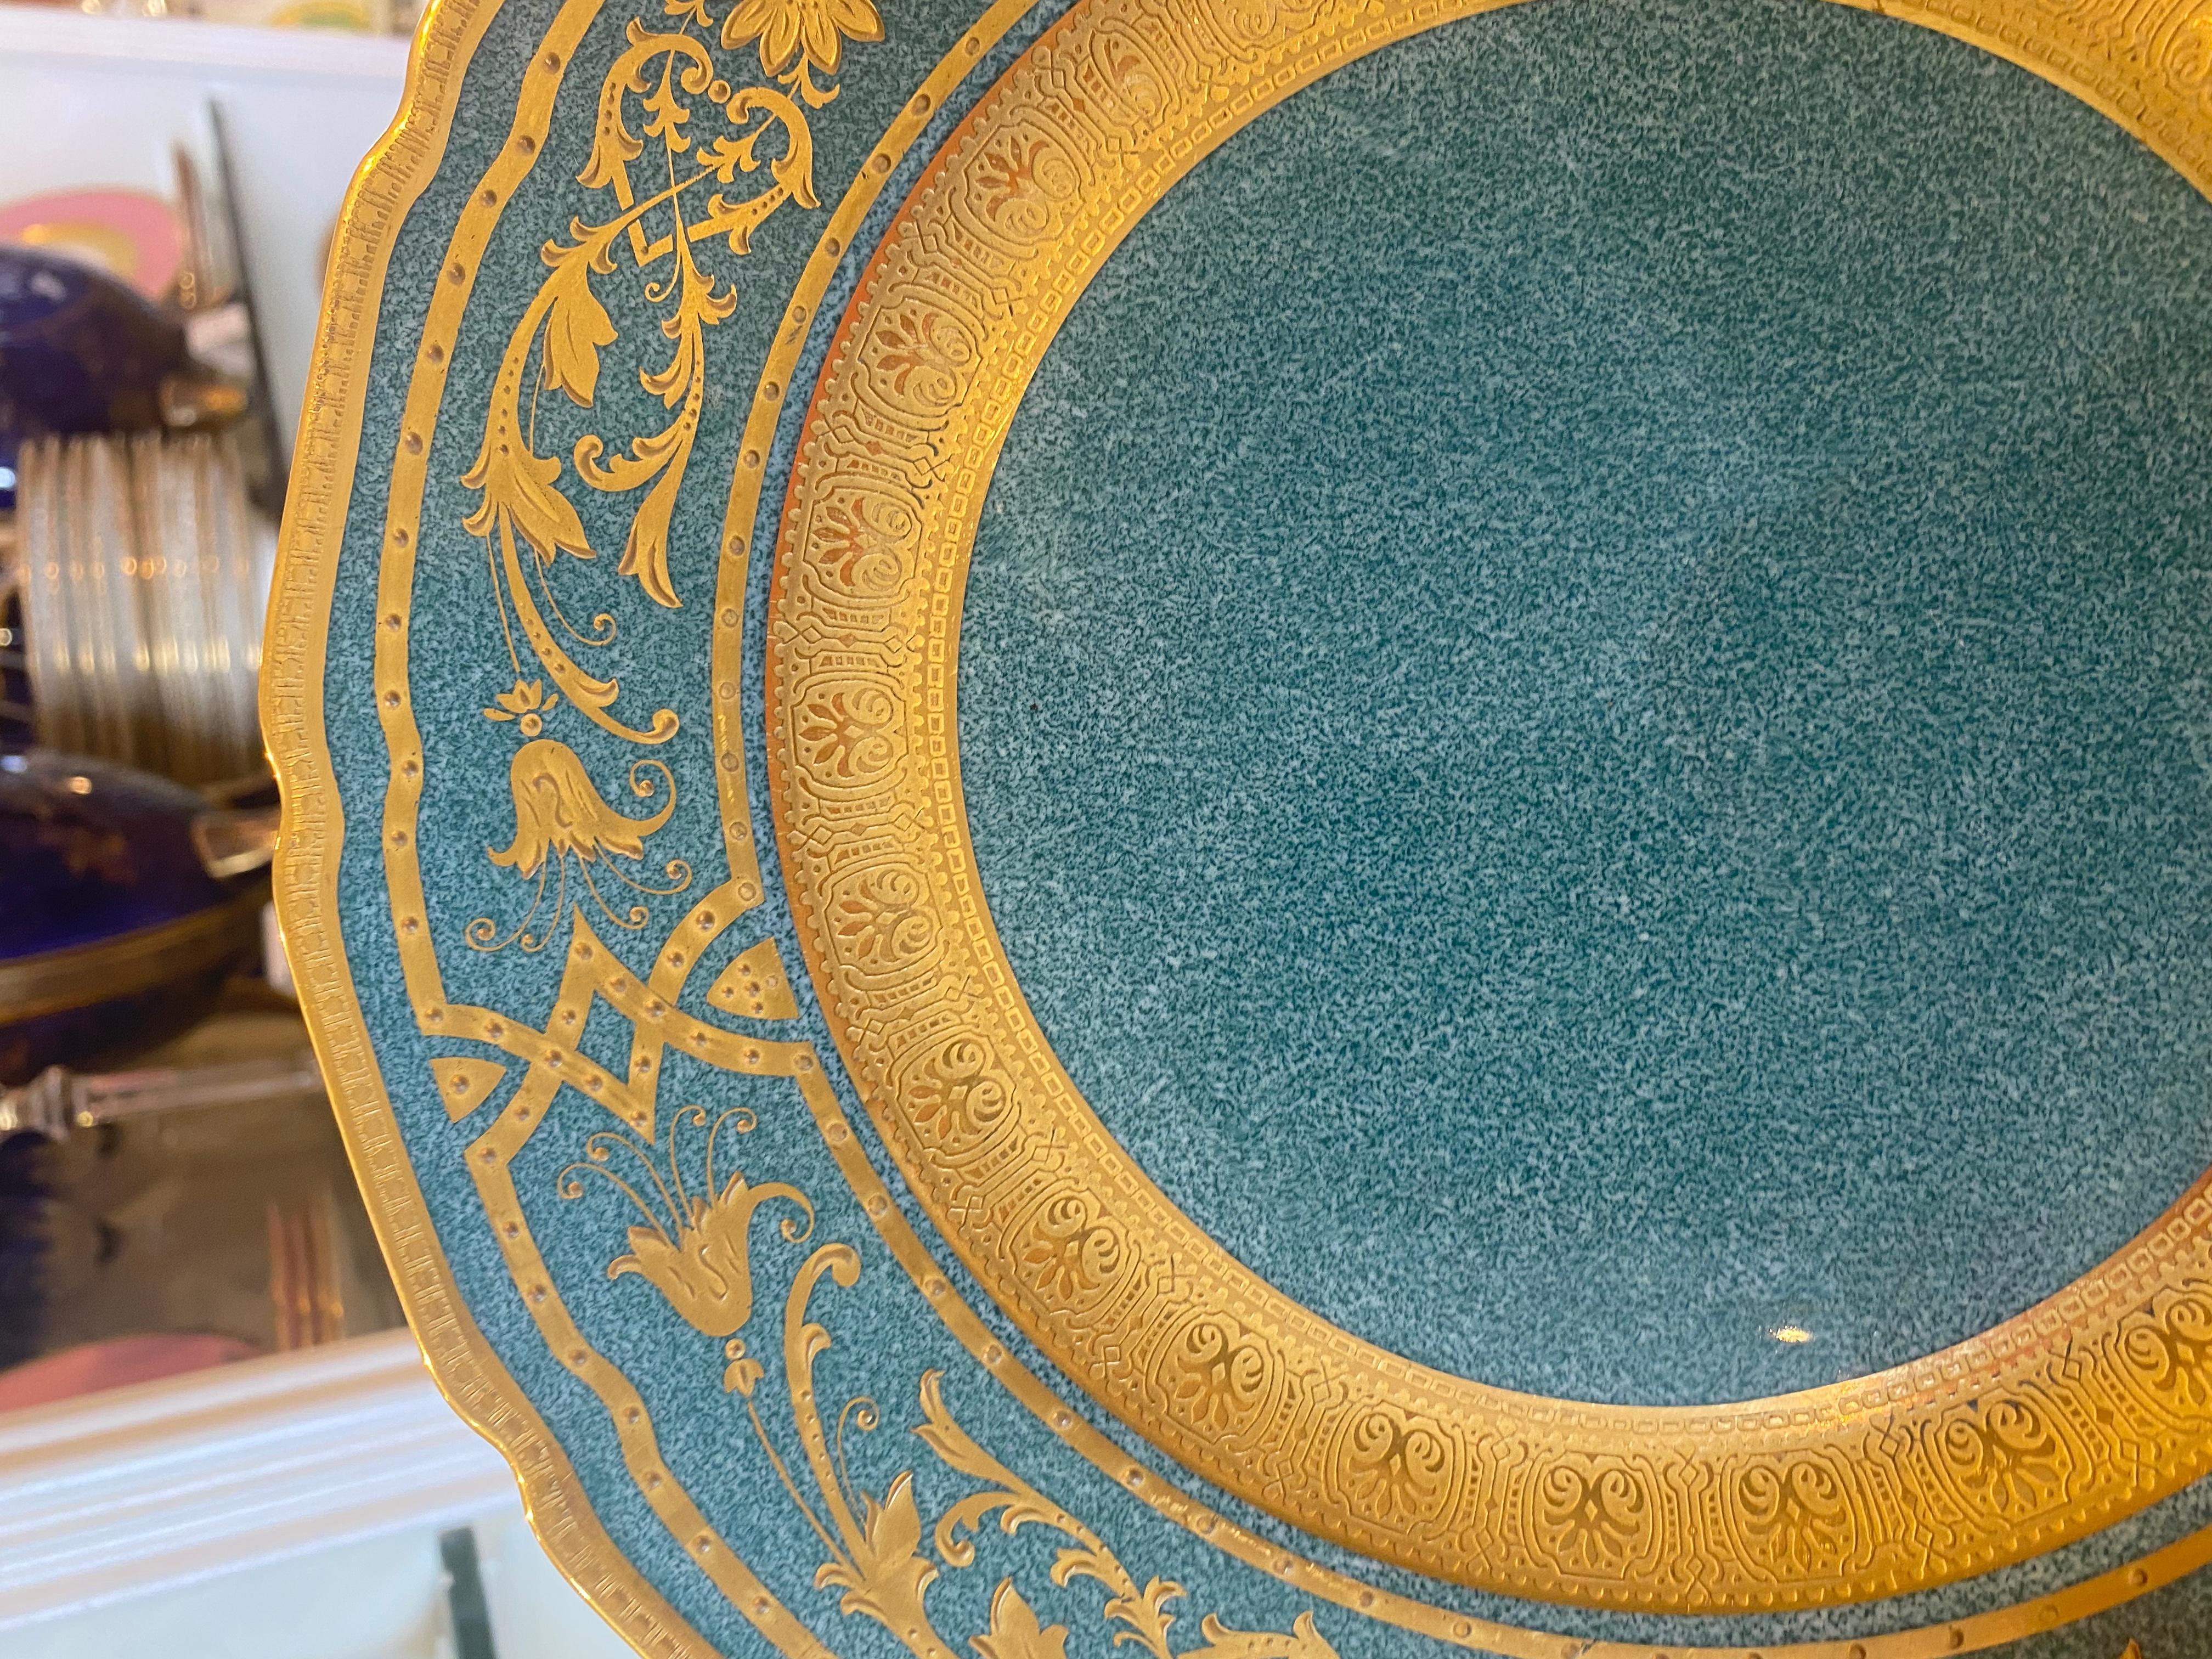 Hand-Crafted 12 Vibrant Turquoise Green Raised Gilt Encrusted Dinner Plates, Antique English